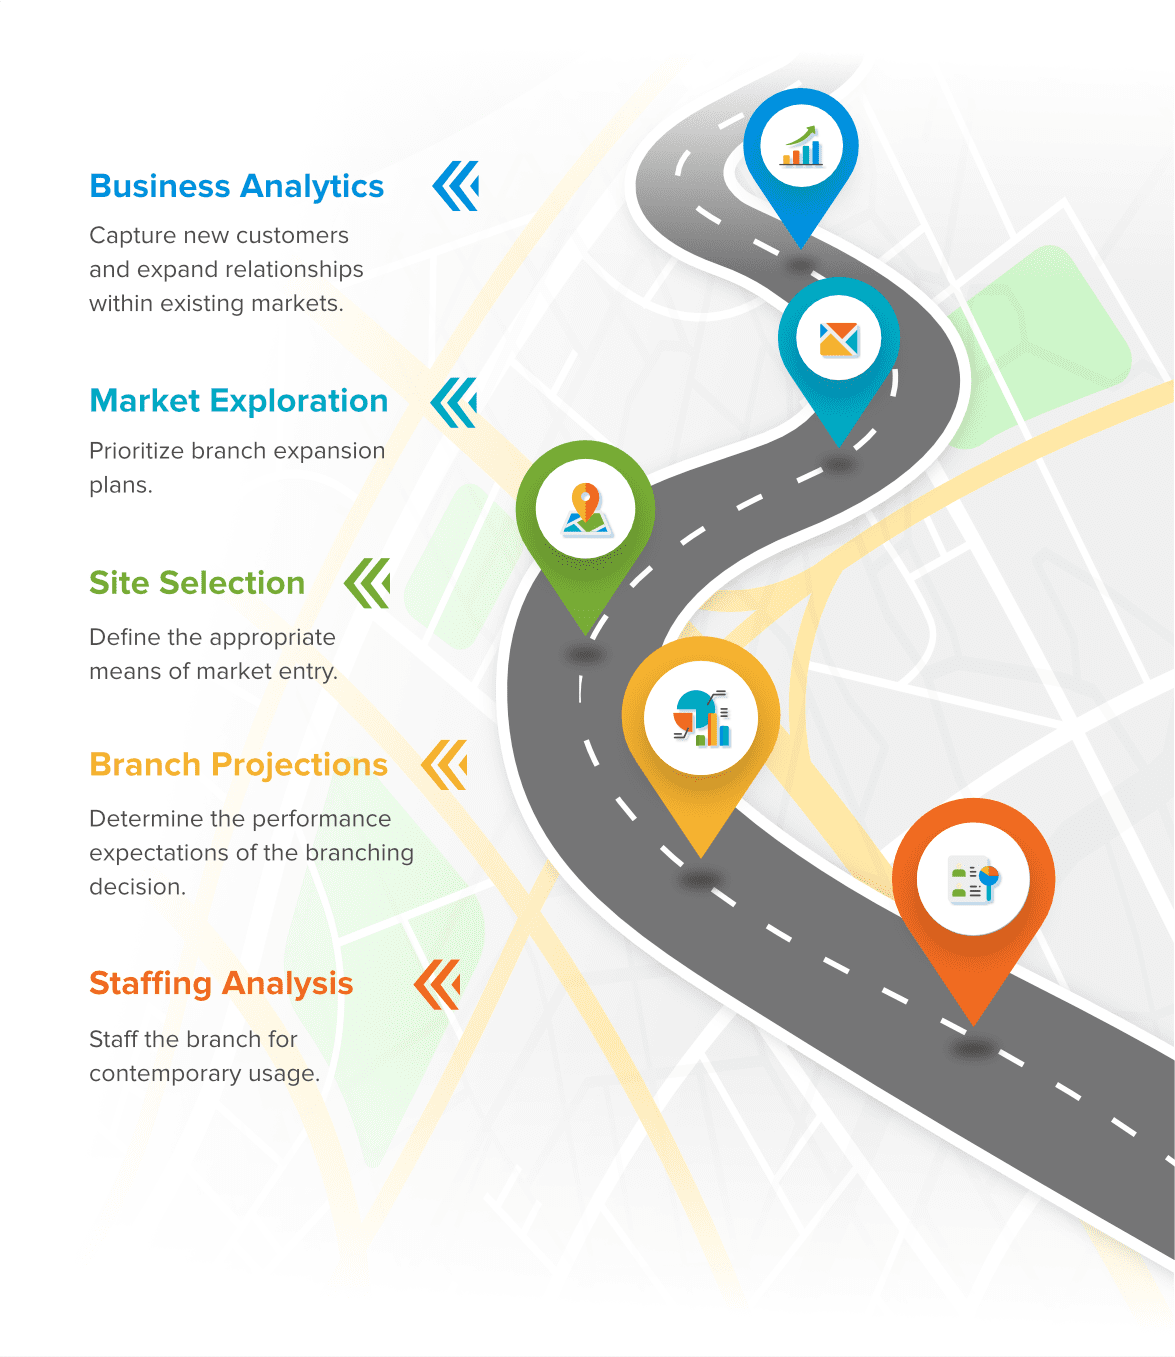 Market Intelligence graphic showing the process: Business Analytics, Market Exploration, Site Selection, Branch Projections, Staffing Analysis